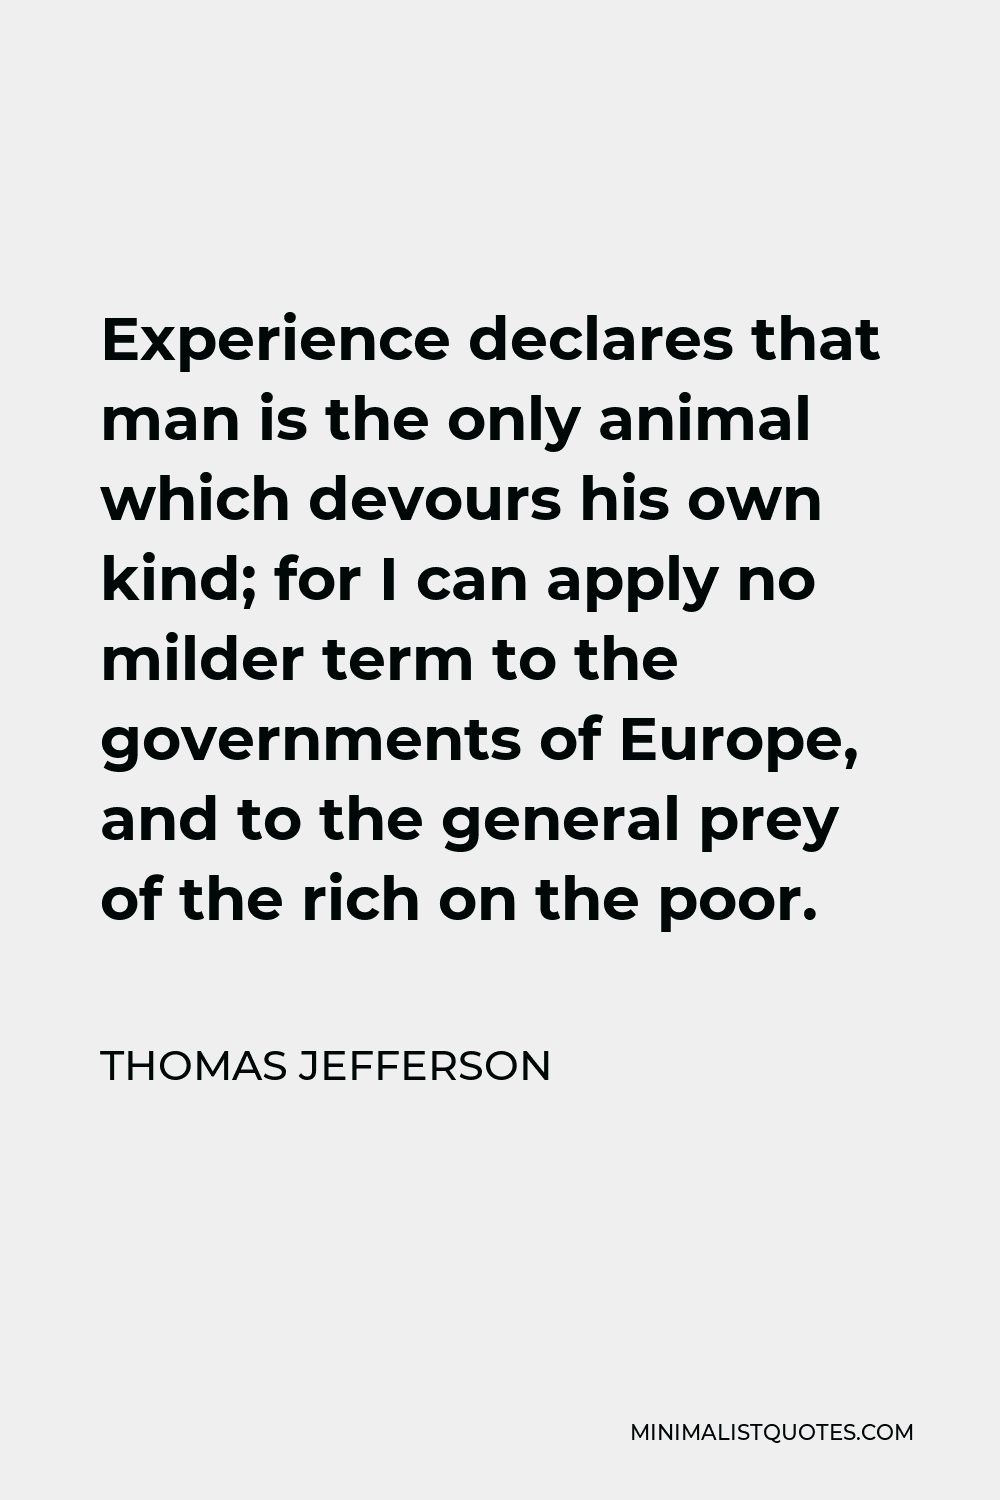 Thomas Jefferson Quote - Experience declares that man is the only animal which devours his own kind; for I can apply no milder term to the governments of Europe, and to the general prey of the rich on the poor.